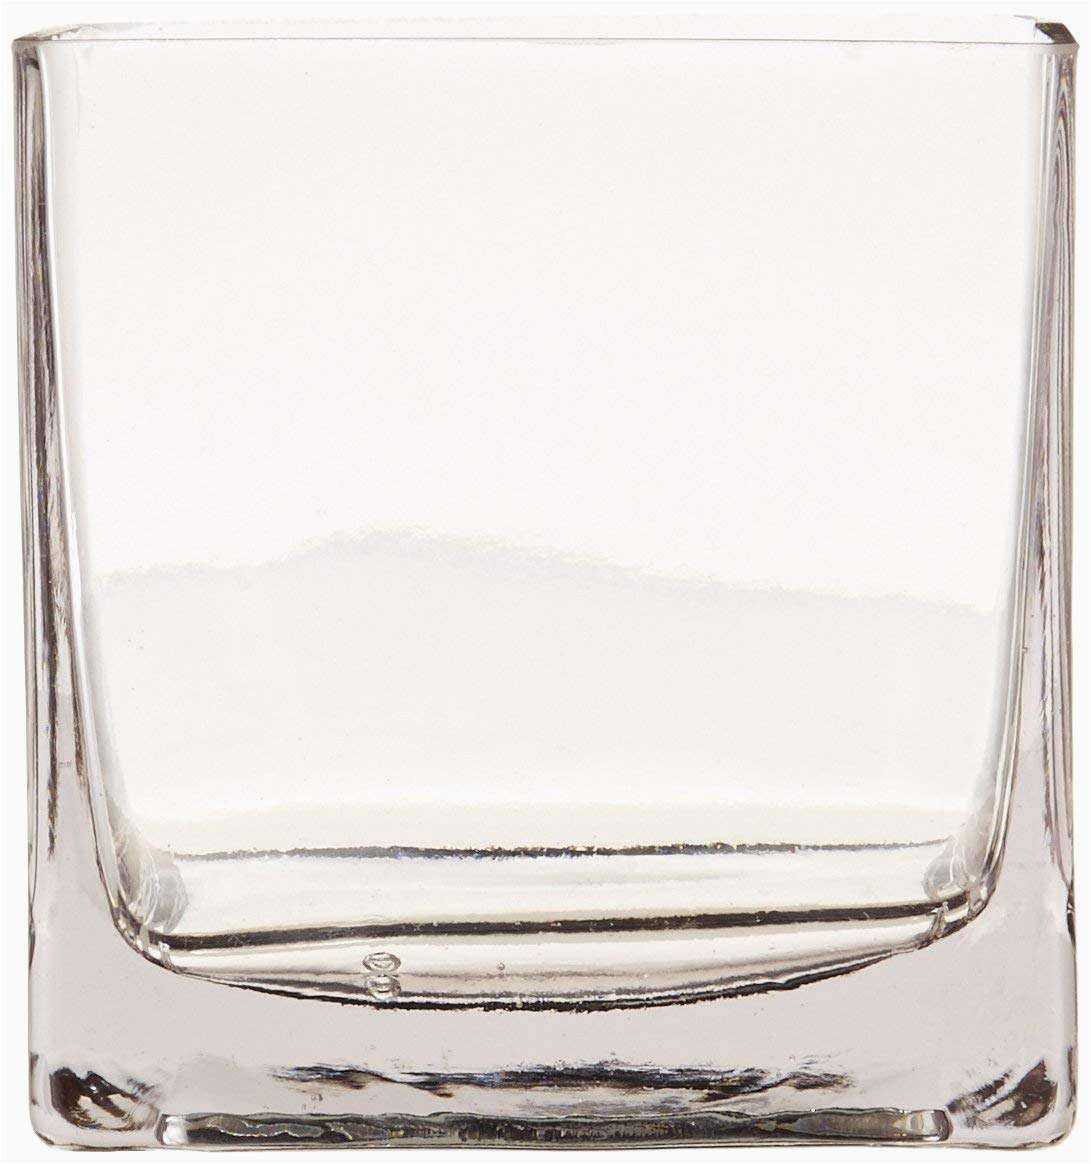 19 Stylish Glass Candle Vases wholesale 2024 free download glass candle vases wholesale of clear flat glass ornaments gallery amazon 12piece 4 square crystal with regard to clear flat glass ornaments photo amazon 12piece 4 square crystal clear glass